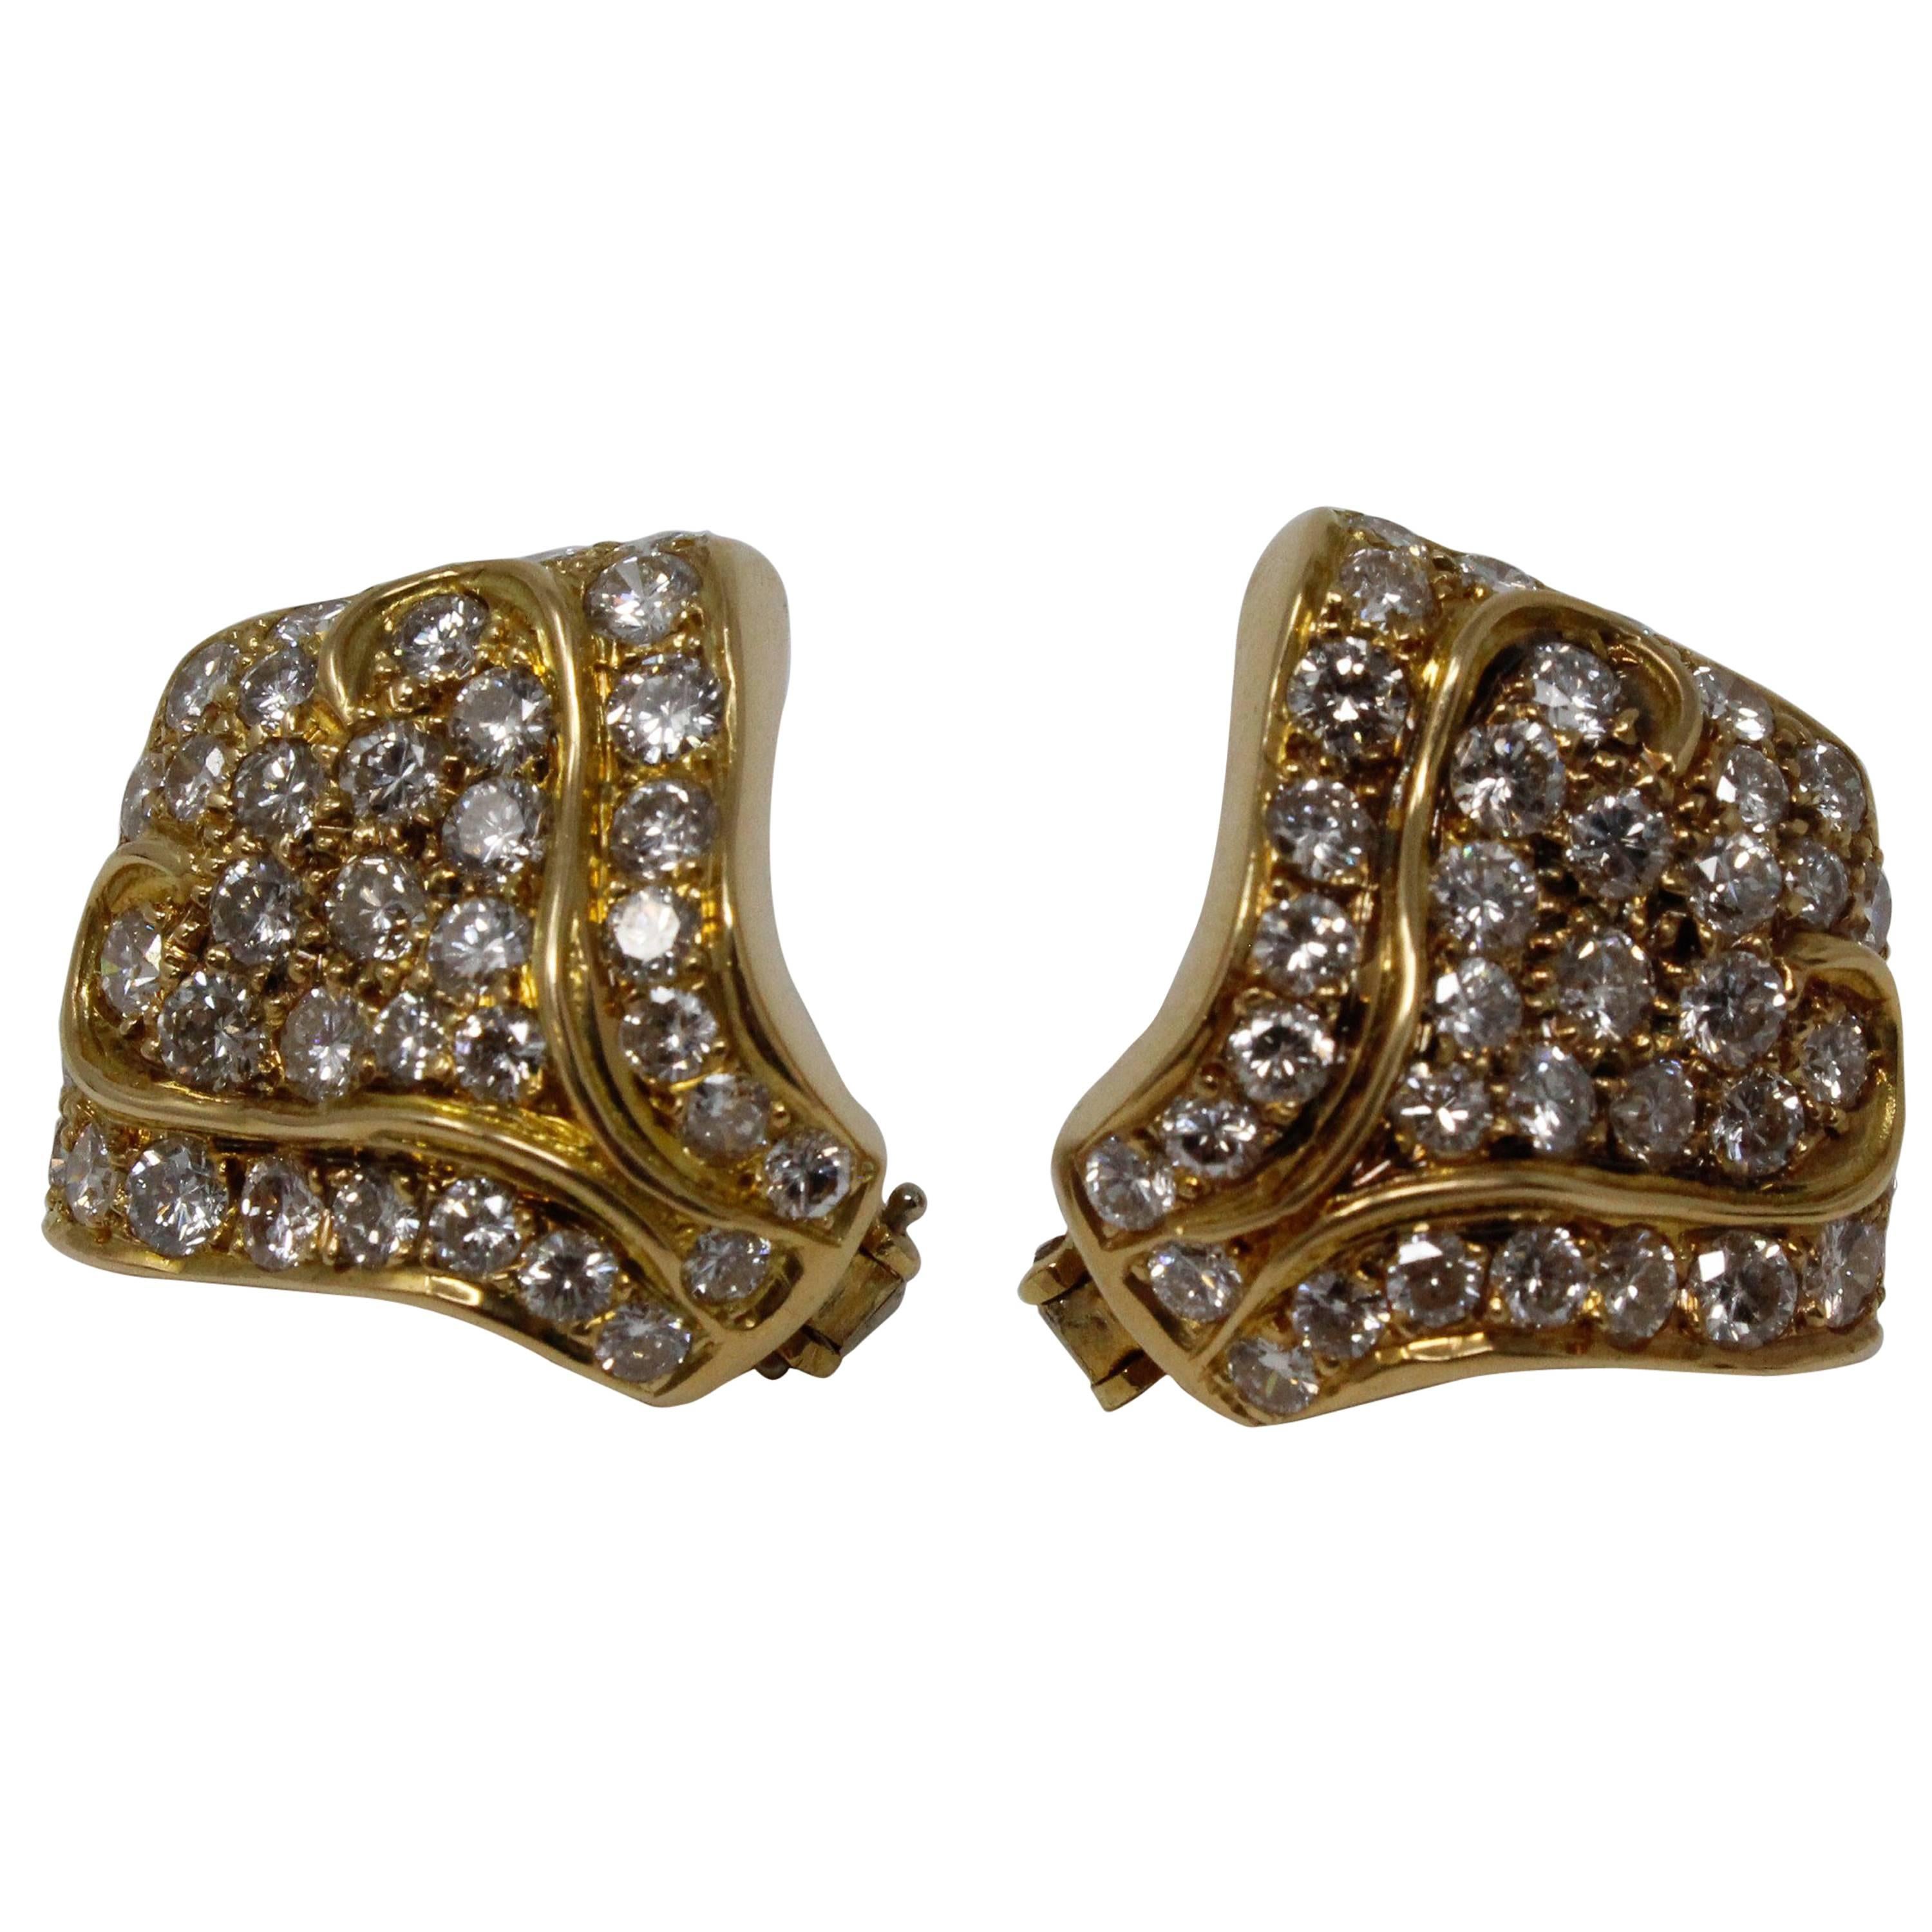 18 karat yellow gold earring with diamonds. There are a total of 78 brilliant cut diamonds with FG color and VVS-Vs clarity weighing between 6.5 and 7.0 carats.